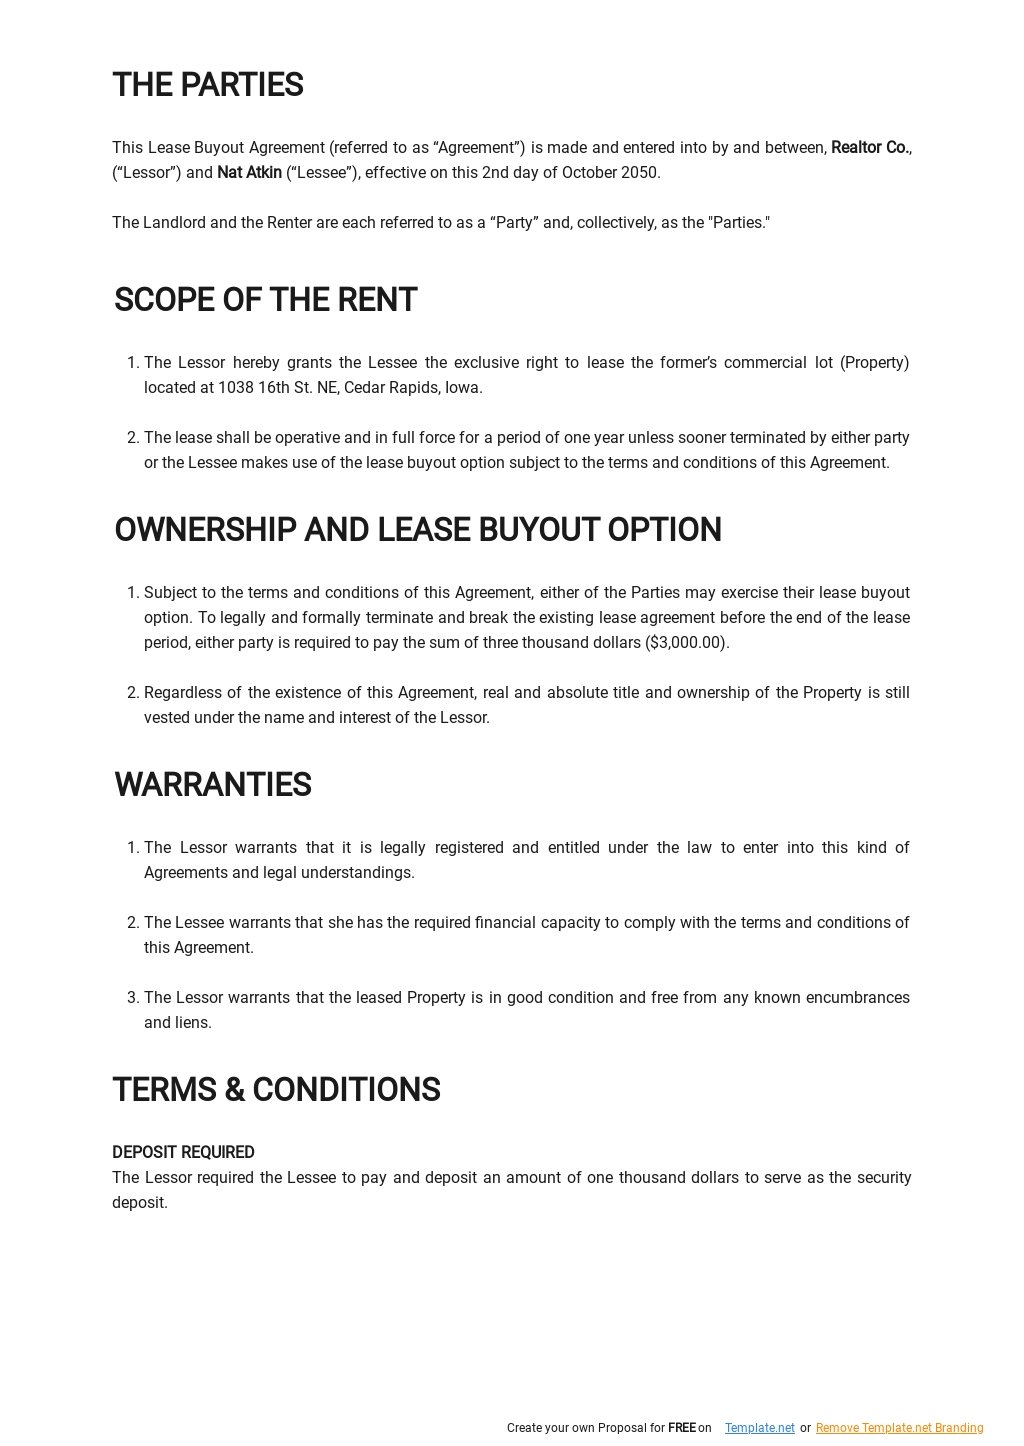 Lease Buyout Agreement Template 1.jpe